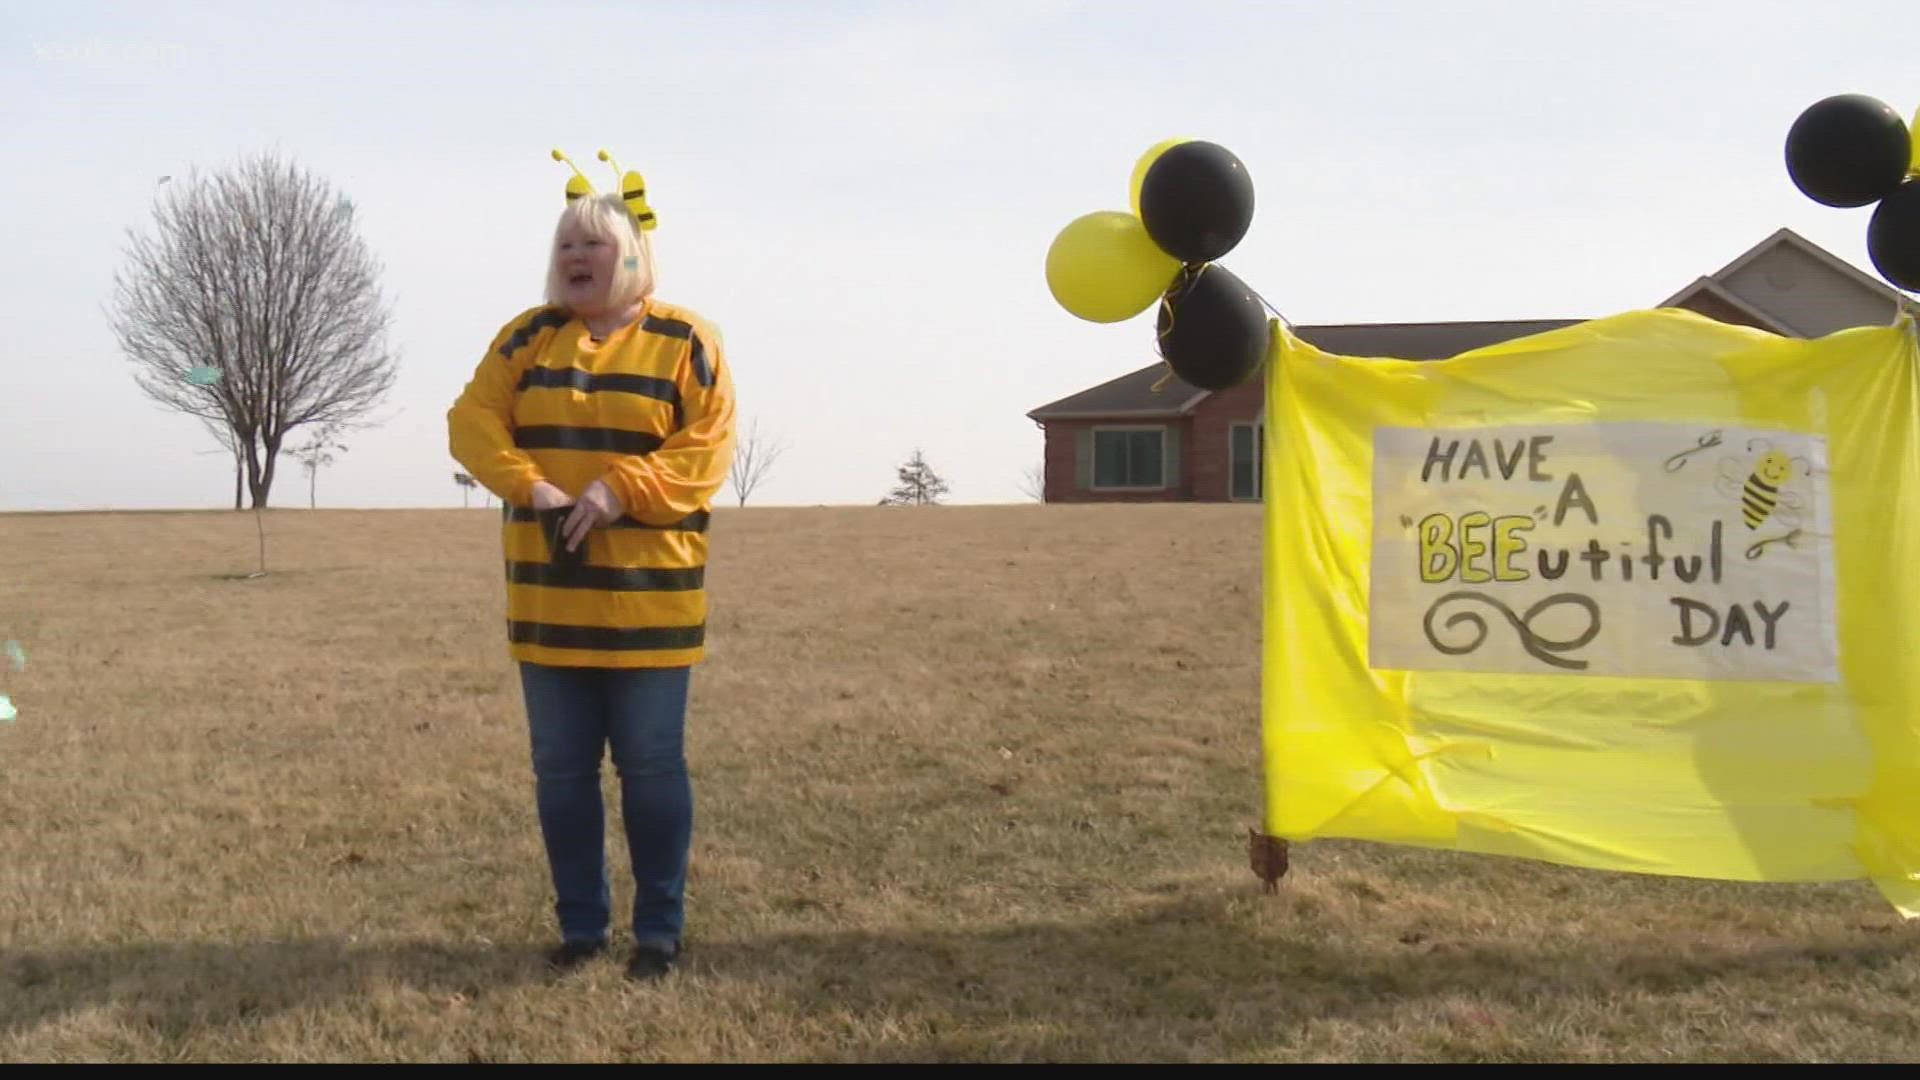 Dana Hottenrott dresses up in fun costumes and makes signs with words of encouragement for five of her grandchildren who ride the bus to and from school.